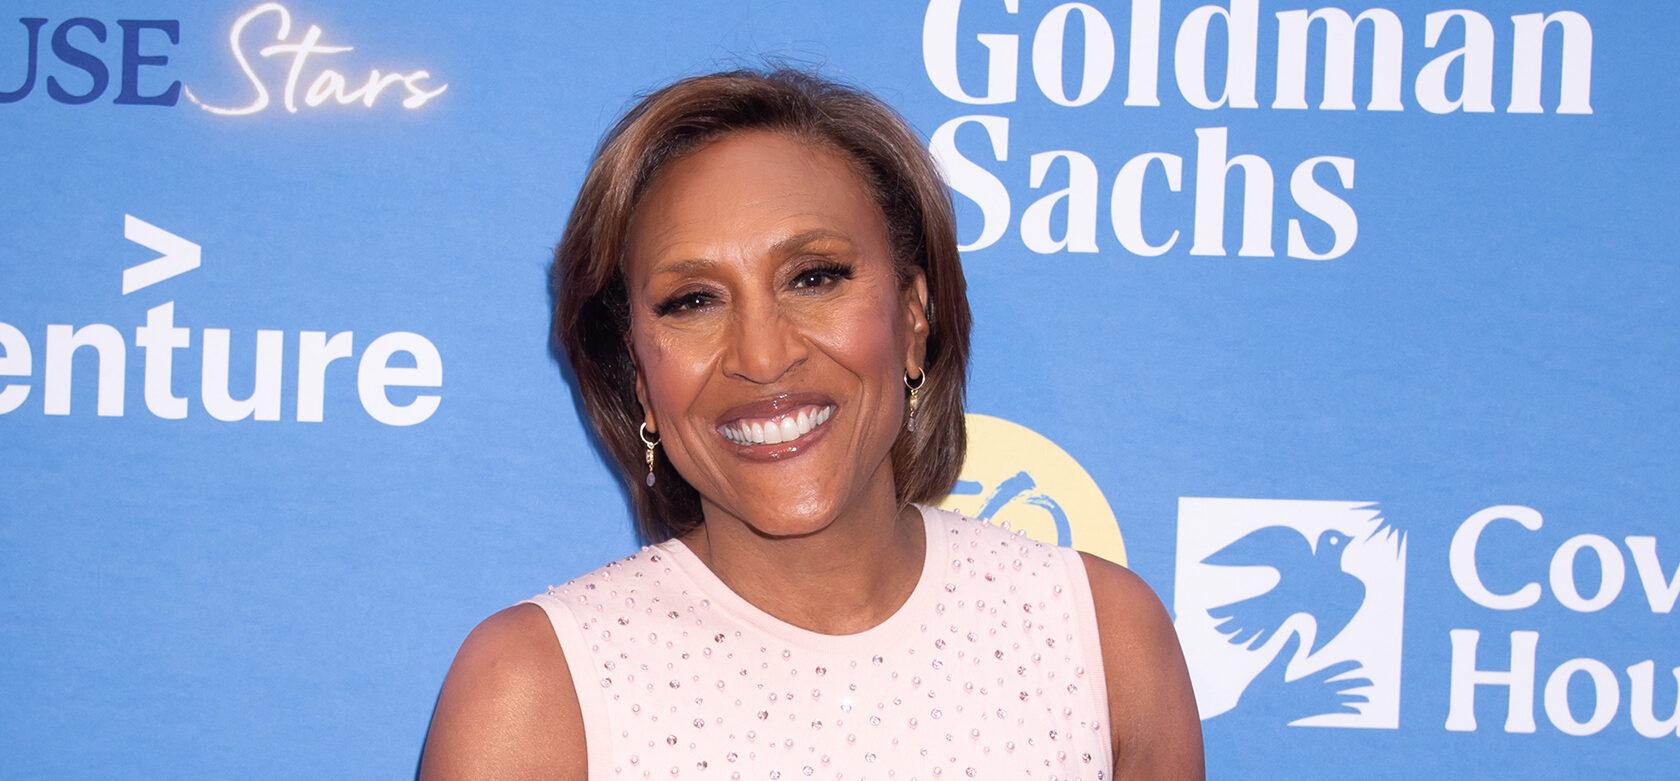 ‘GMA’ Host Robin Roberts Jumps From New Zealand Sky Tower